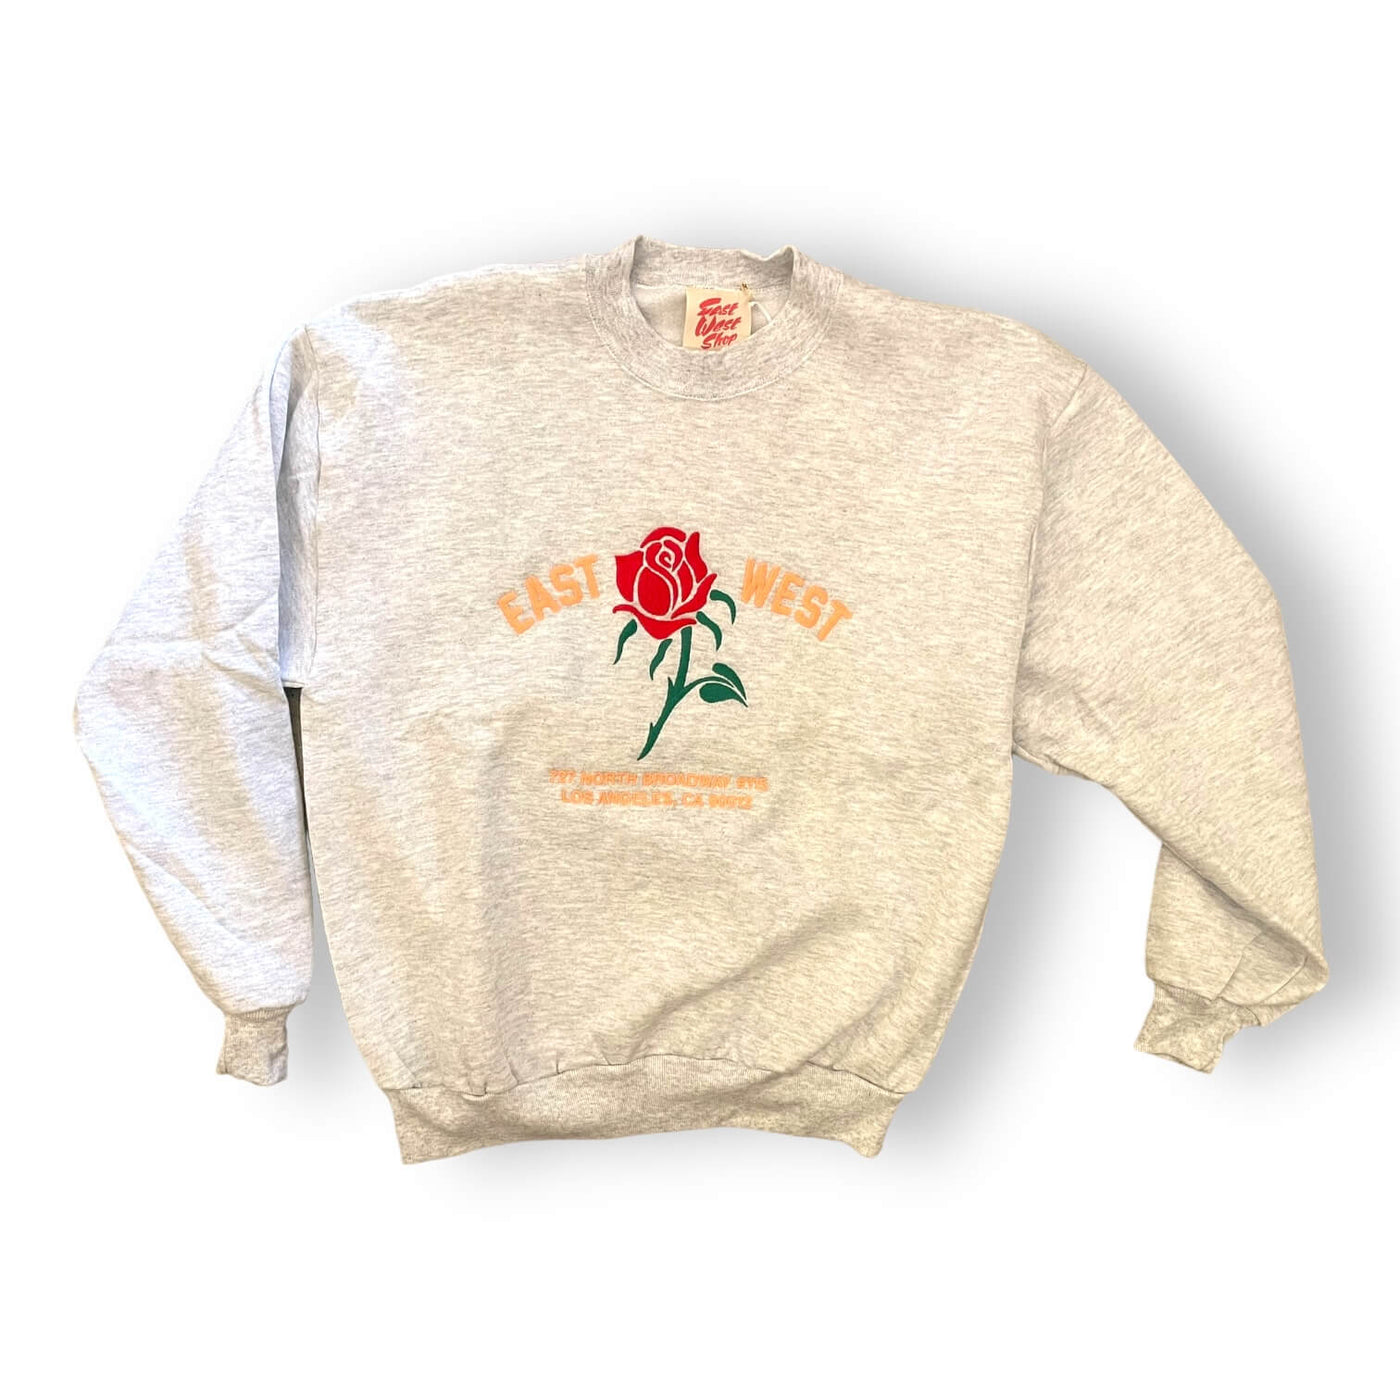 Light speckled Heather grey sweatshirt on white background. The sweatshirt has a red rose embroidered on the center. To the left of the rose it says “EAST” and to the right it says “WEST” under the rose reads “ 727 NORTH BROADWAY #115 LOS ANGELES, CA 90012” in pink text.